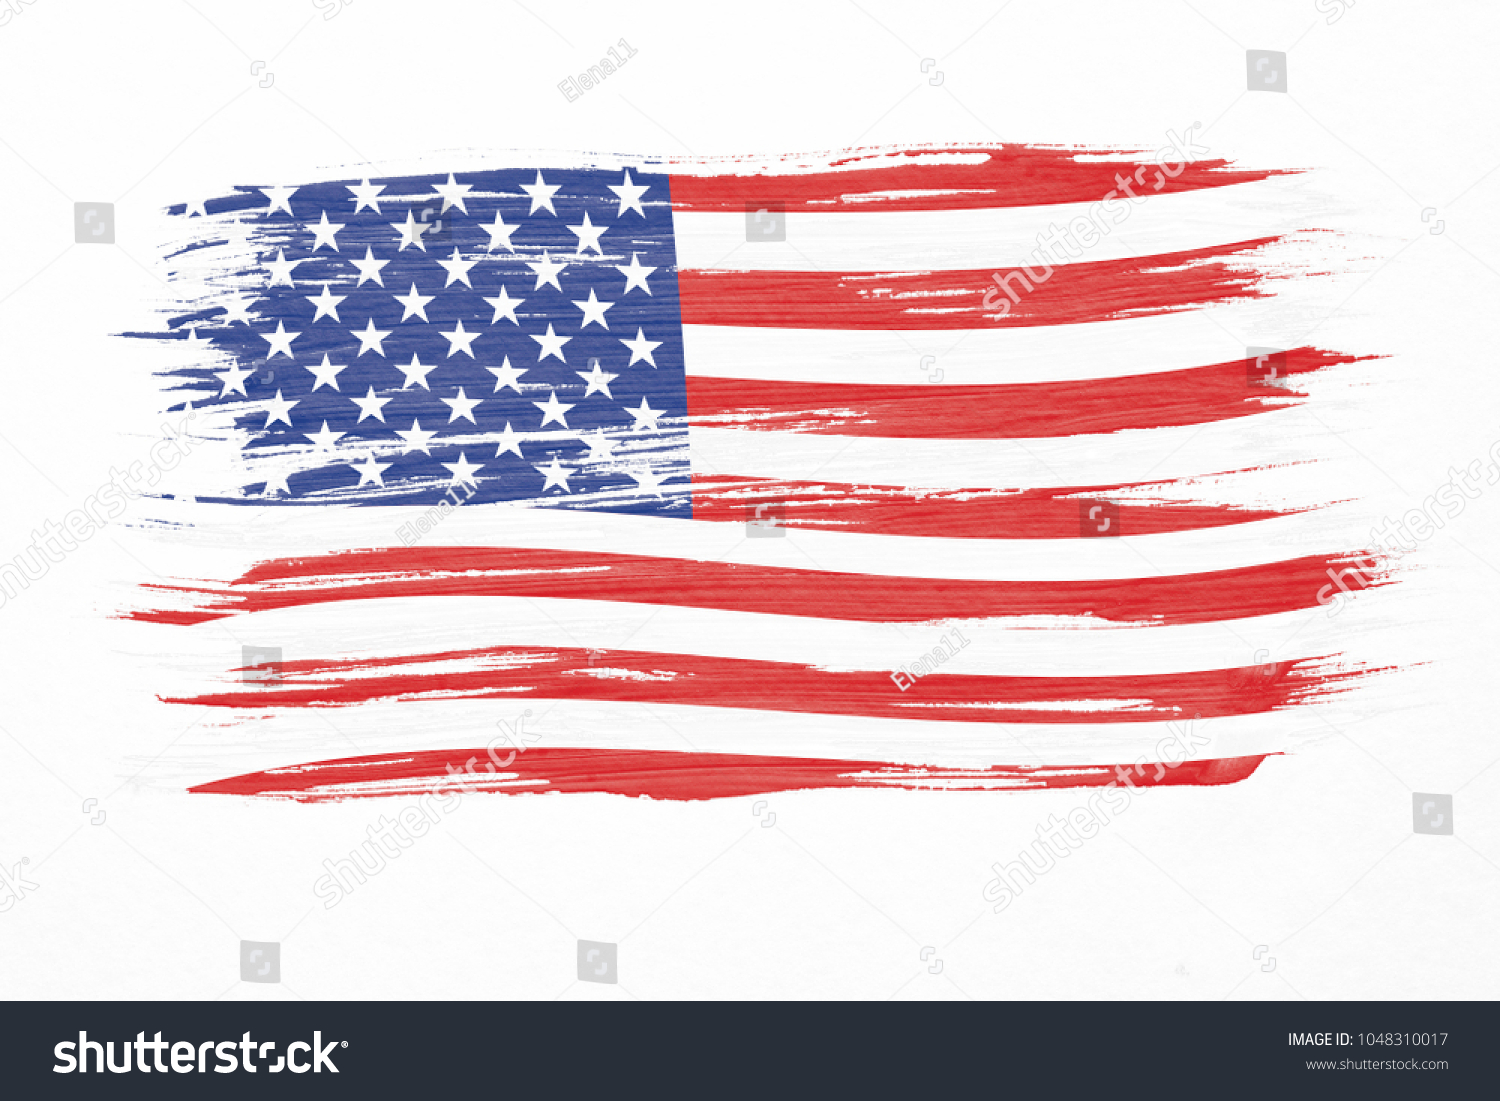 Art brush watercolor painting of USA flag blown in the wind isolated on white background. #1048310017